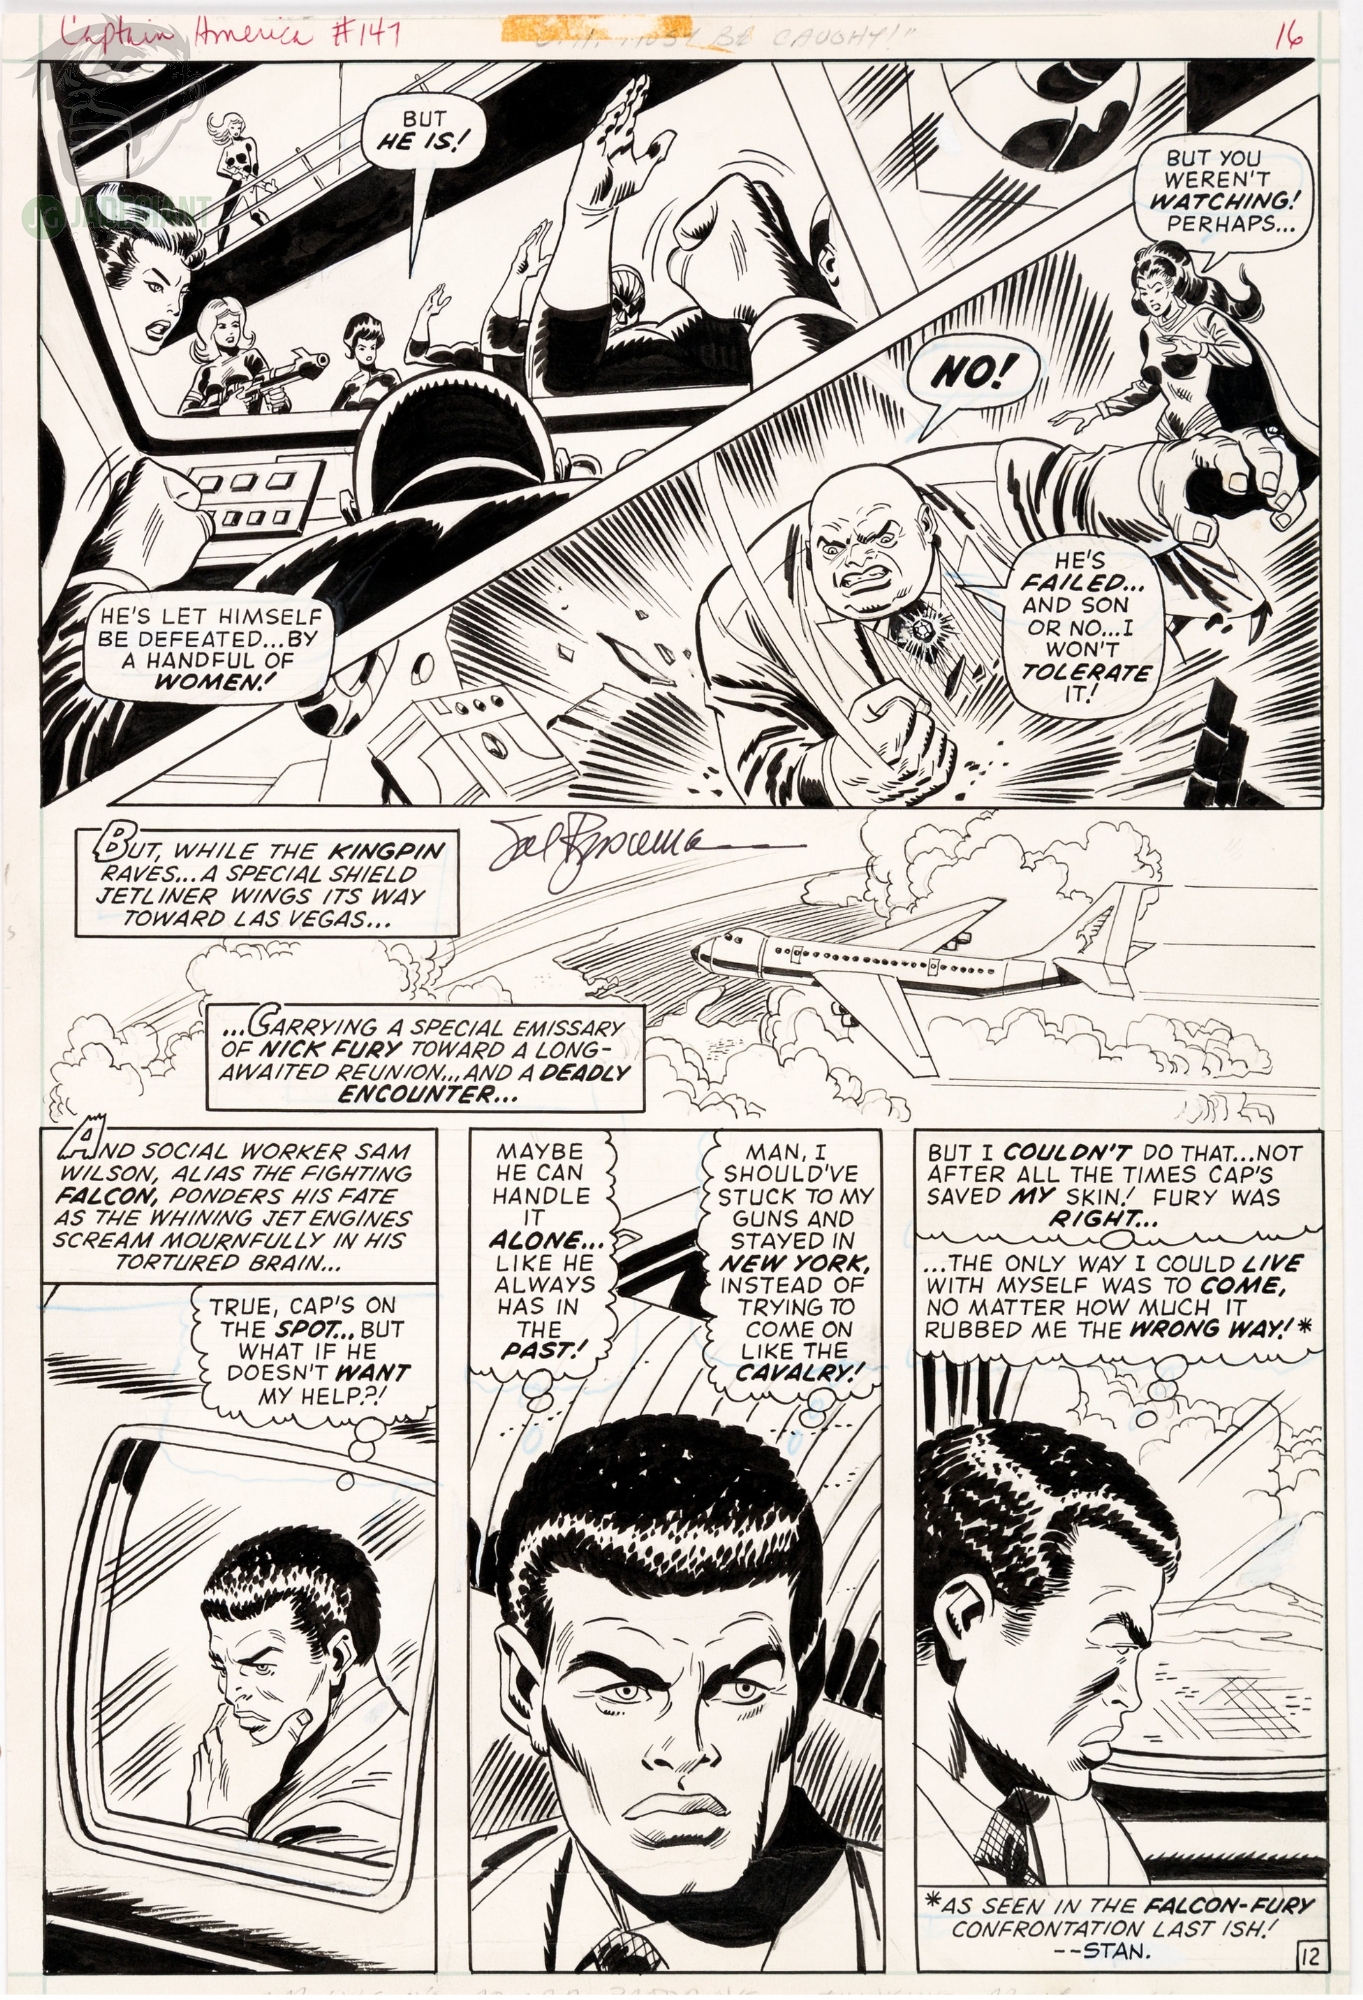 1972 Captain America 147 page 12 by Sal Buscema Comic Art